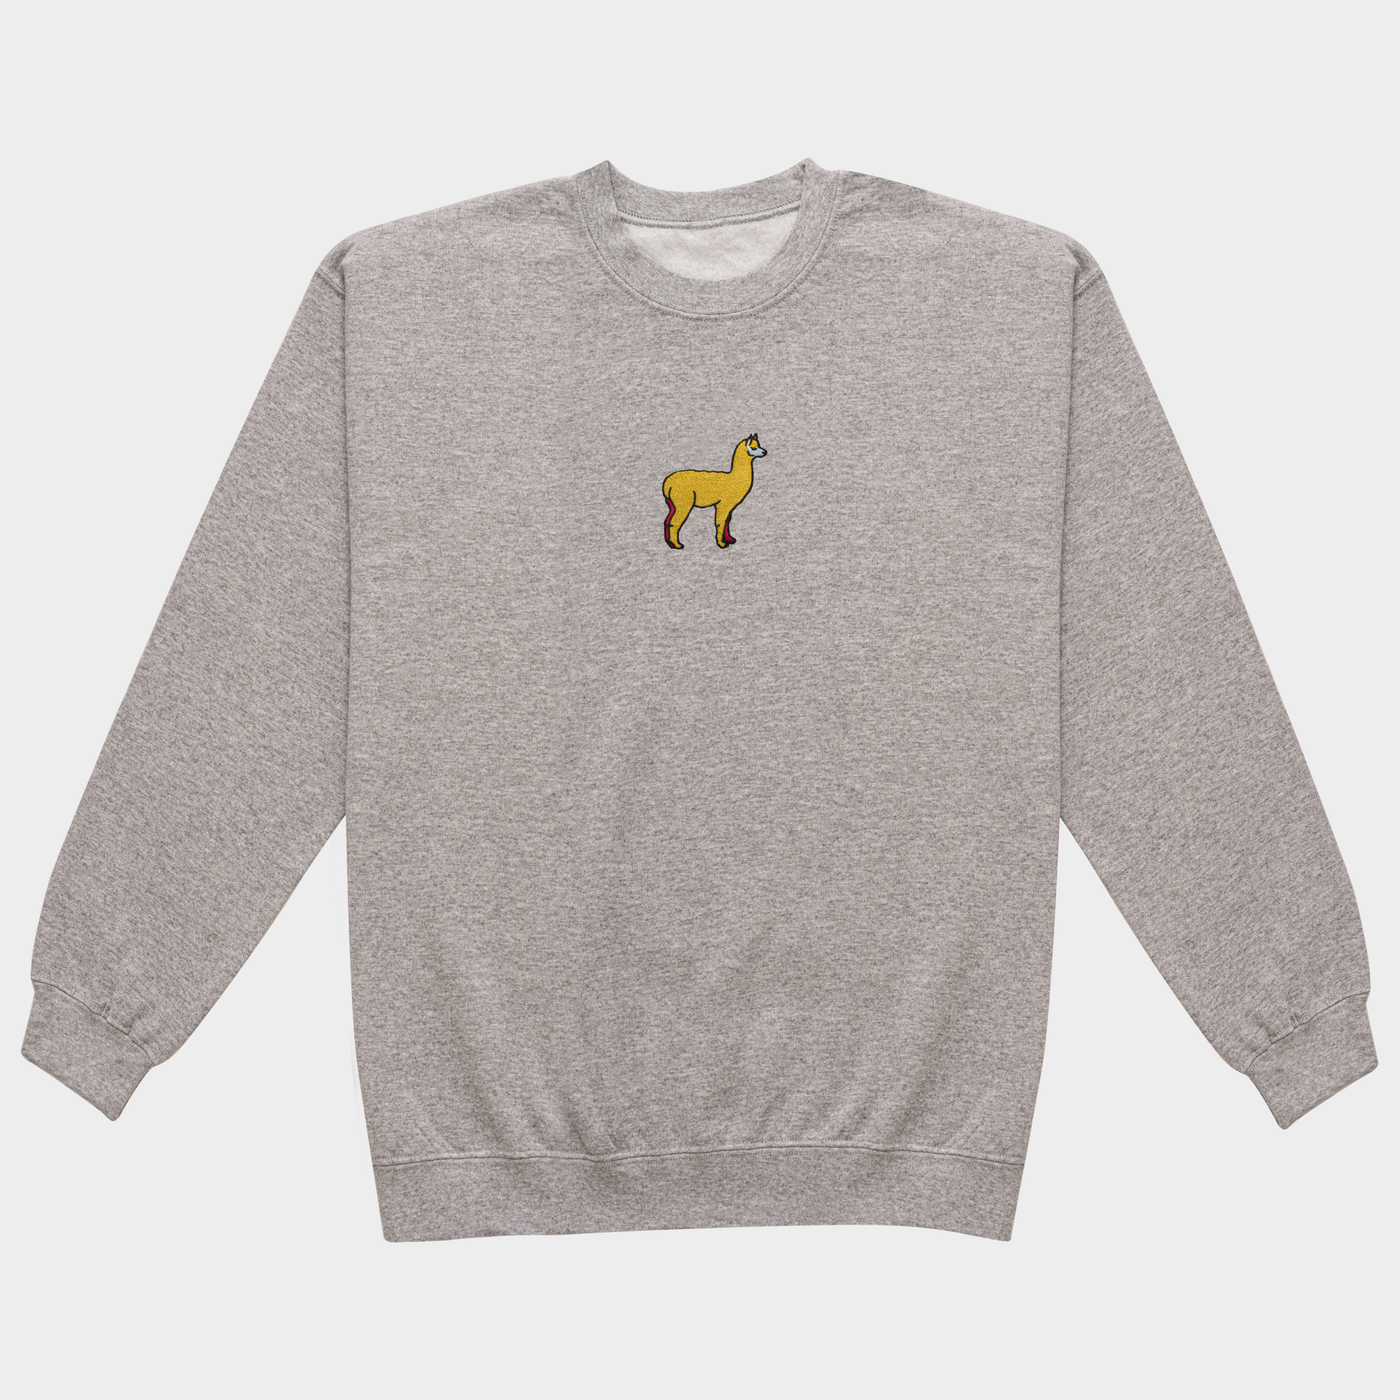 Bobby's Planet Men's Embroidered Alpaca Sweatshirt from South American Amazon Animals Collection in Sport Grey Color#color_sport-grey